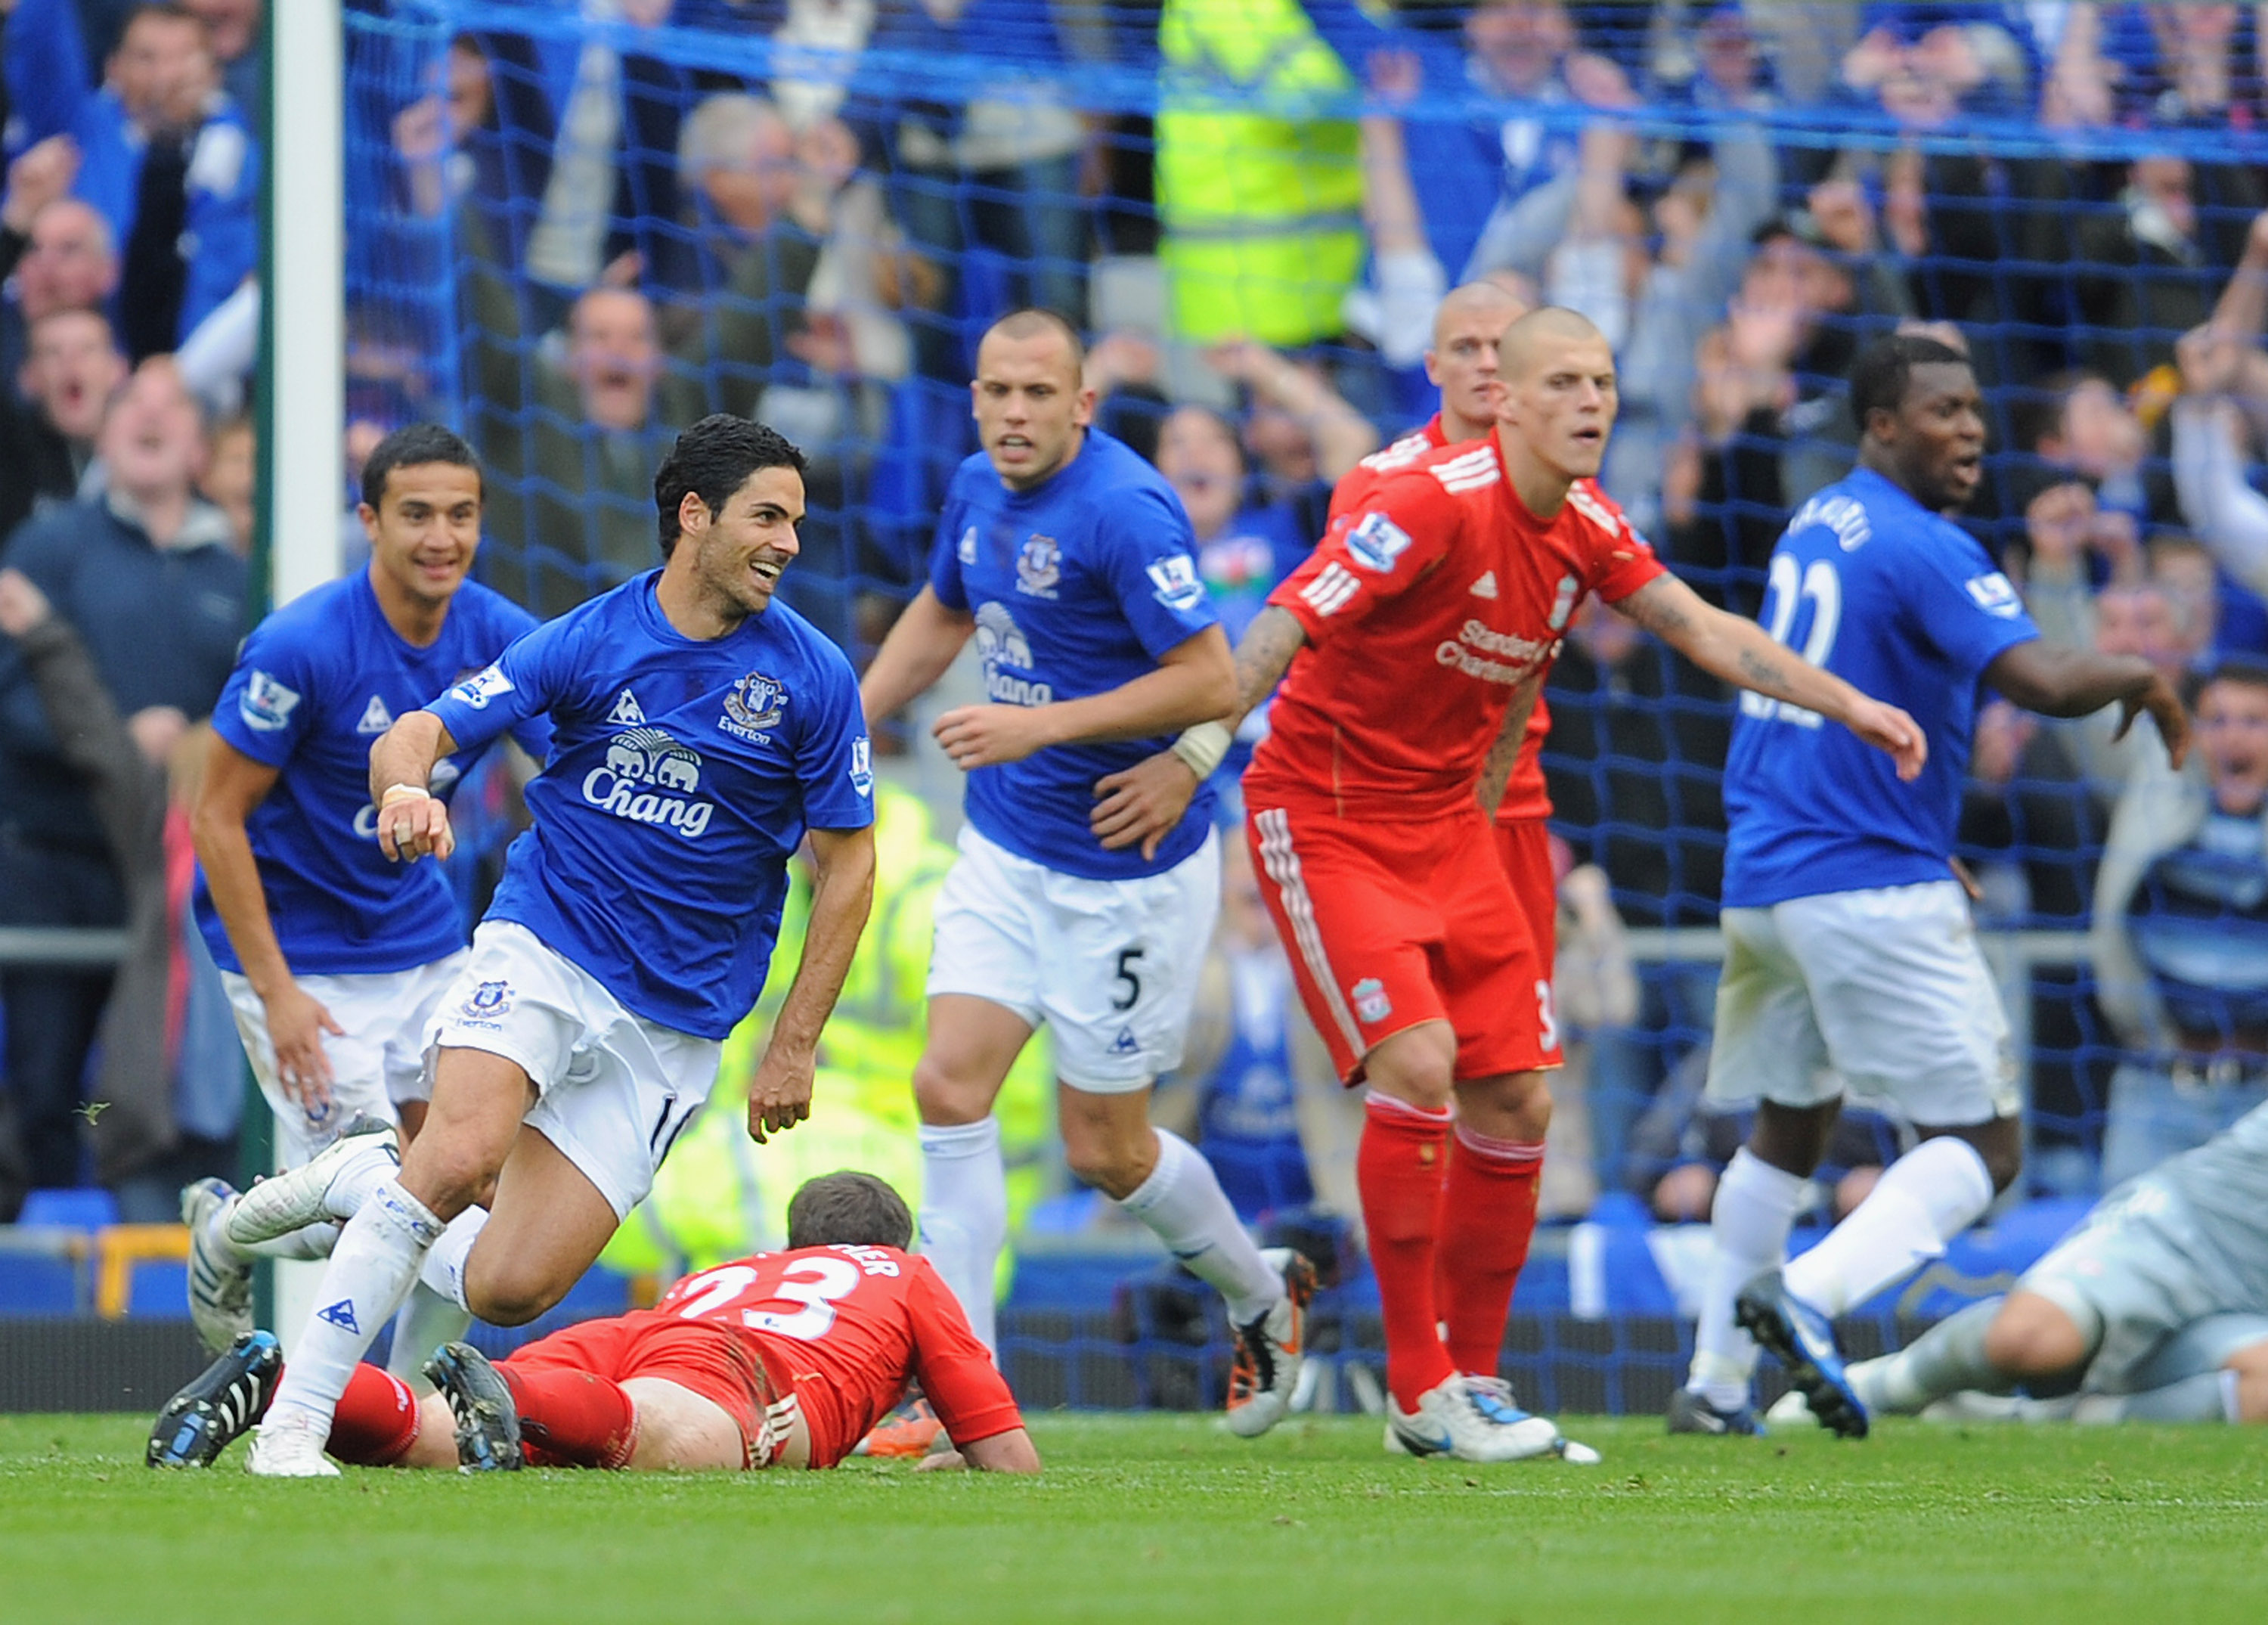 LIVERPOOL, ENGLAND - OCTOBER 17:  Mikel Arteta of Everton celebrates scoring to making it 2-0 during the Barclays Premier League match between Everton and Liverpool at Goodison Park on October 17, 2010 in Liverpool, England.  (Photo by Michael Regan/Getty